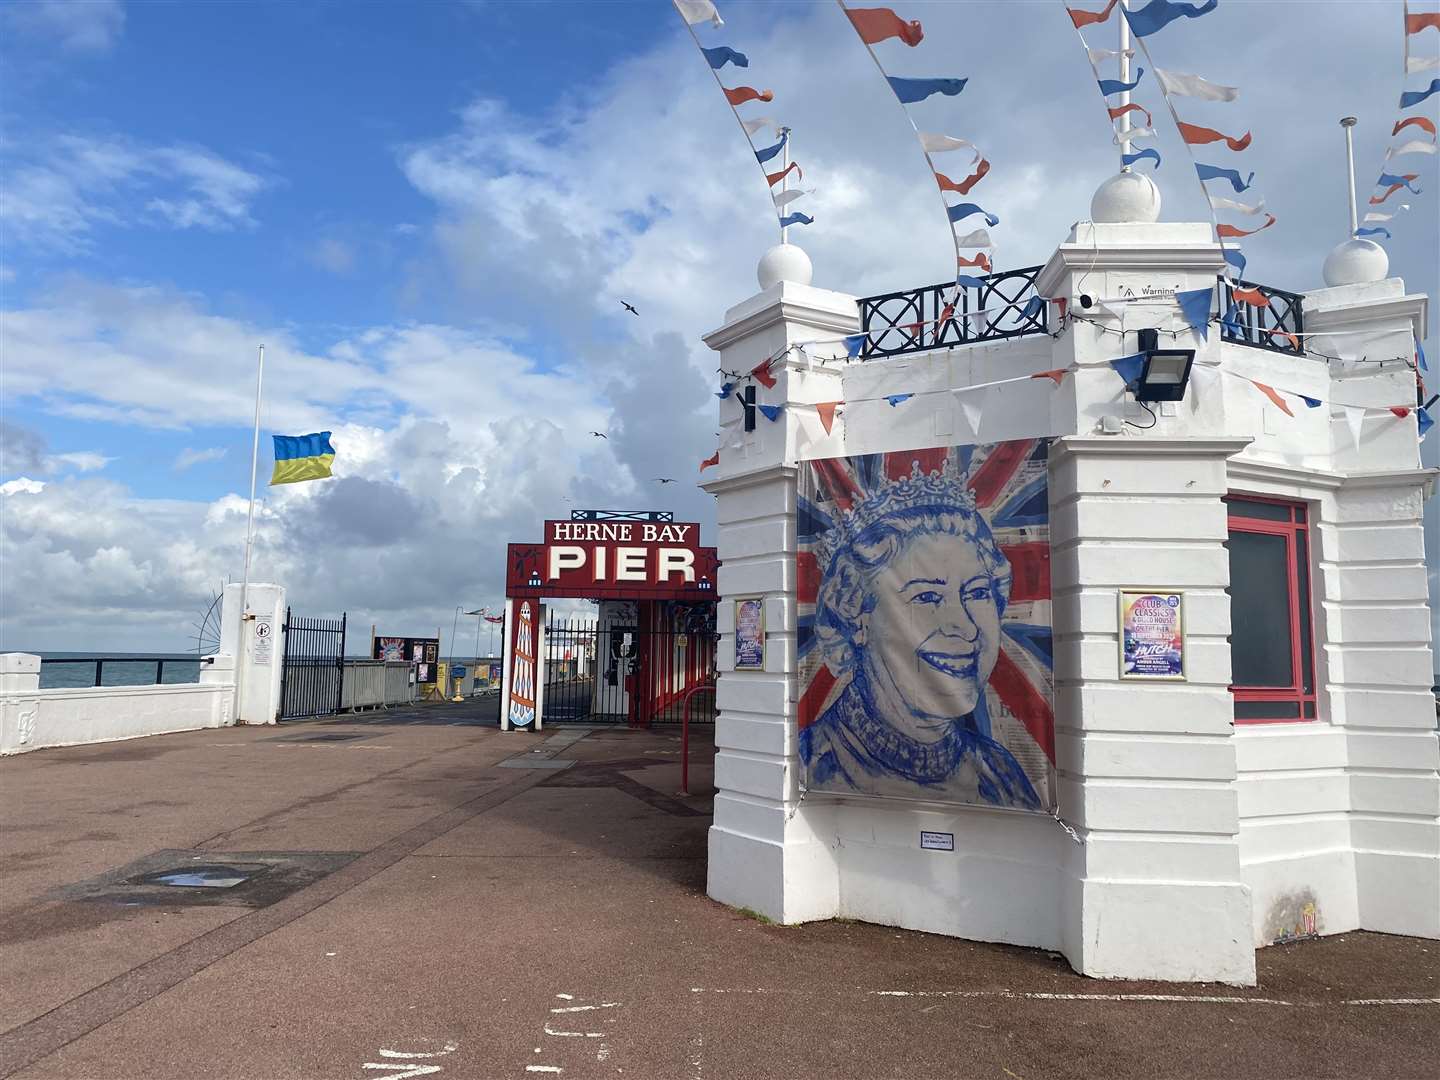 Tributes to the Queen on Herne Bay pier